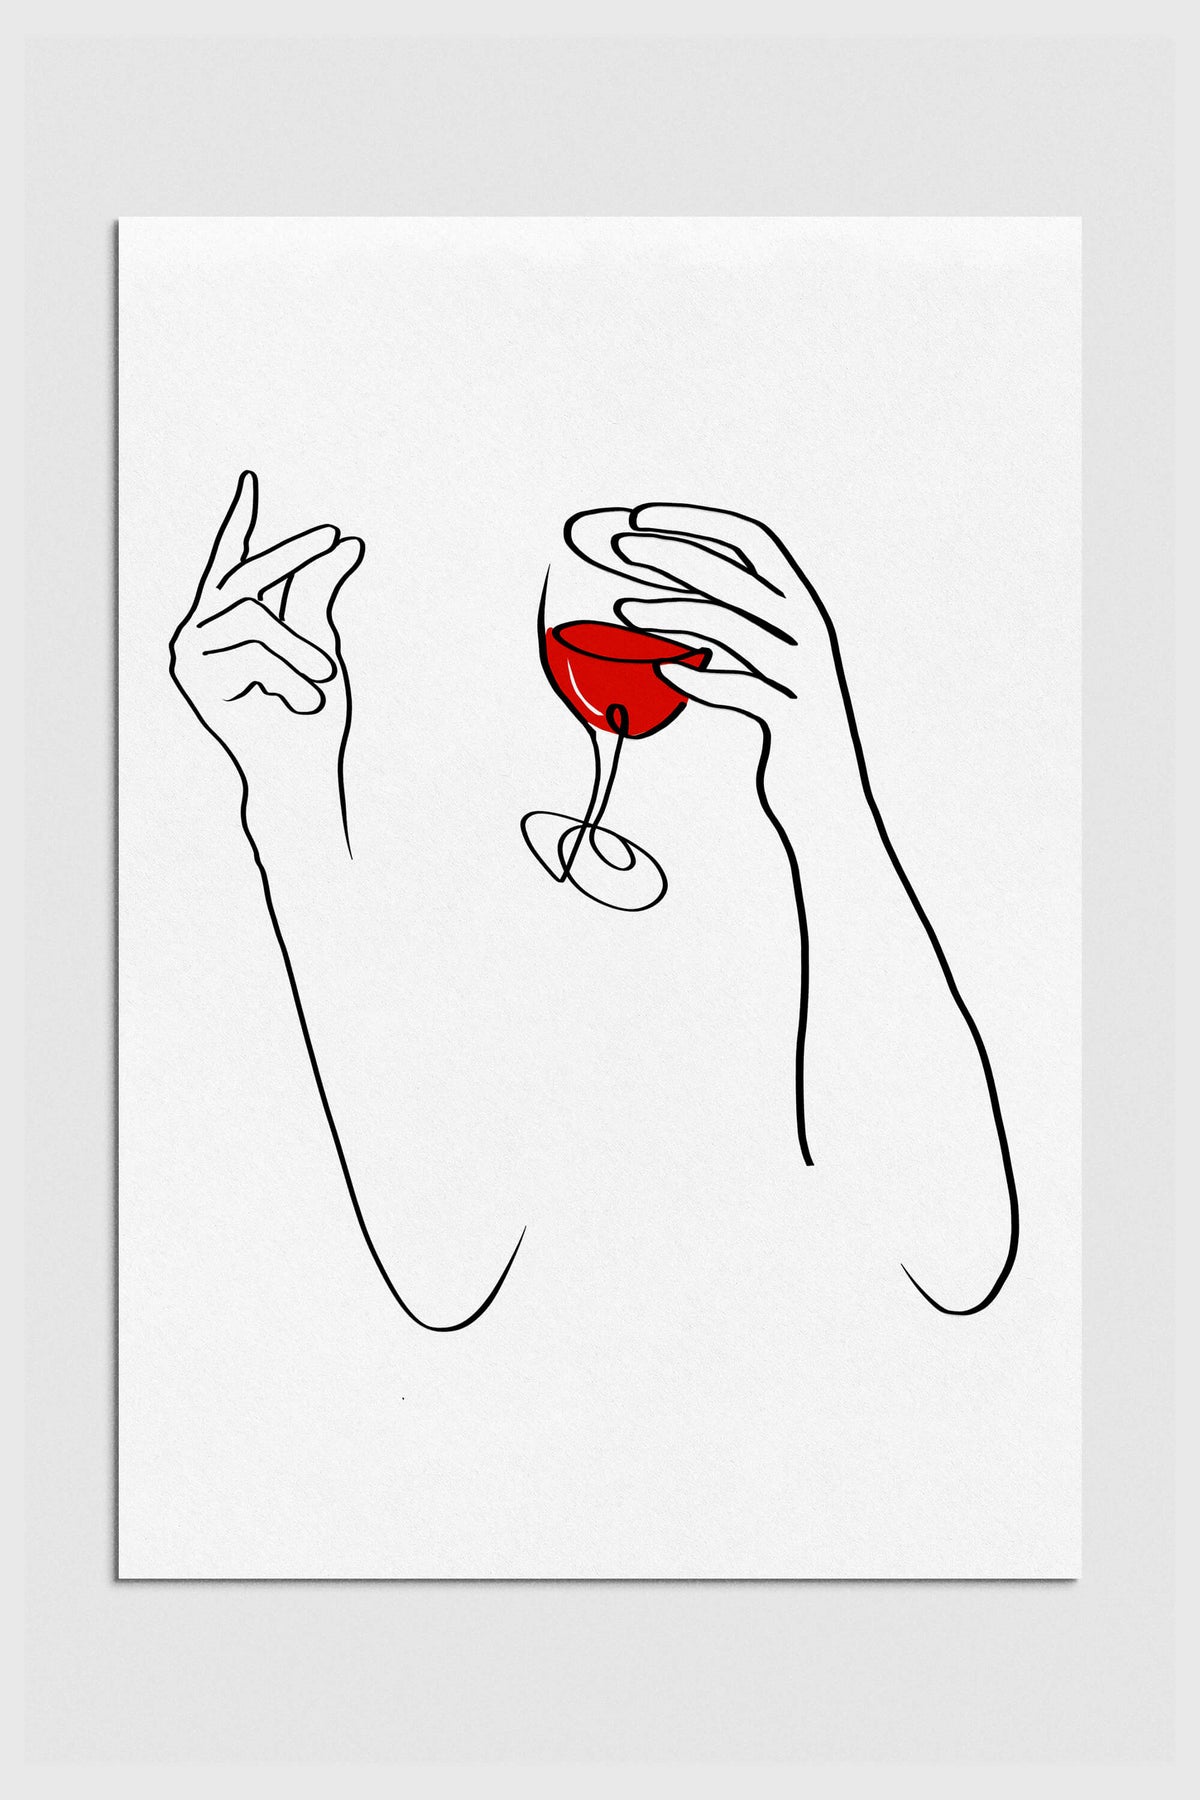 Vibrant art print of a woman enjoying wine, perfect for adding a lively touch to bar wall decor.